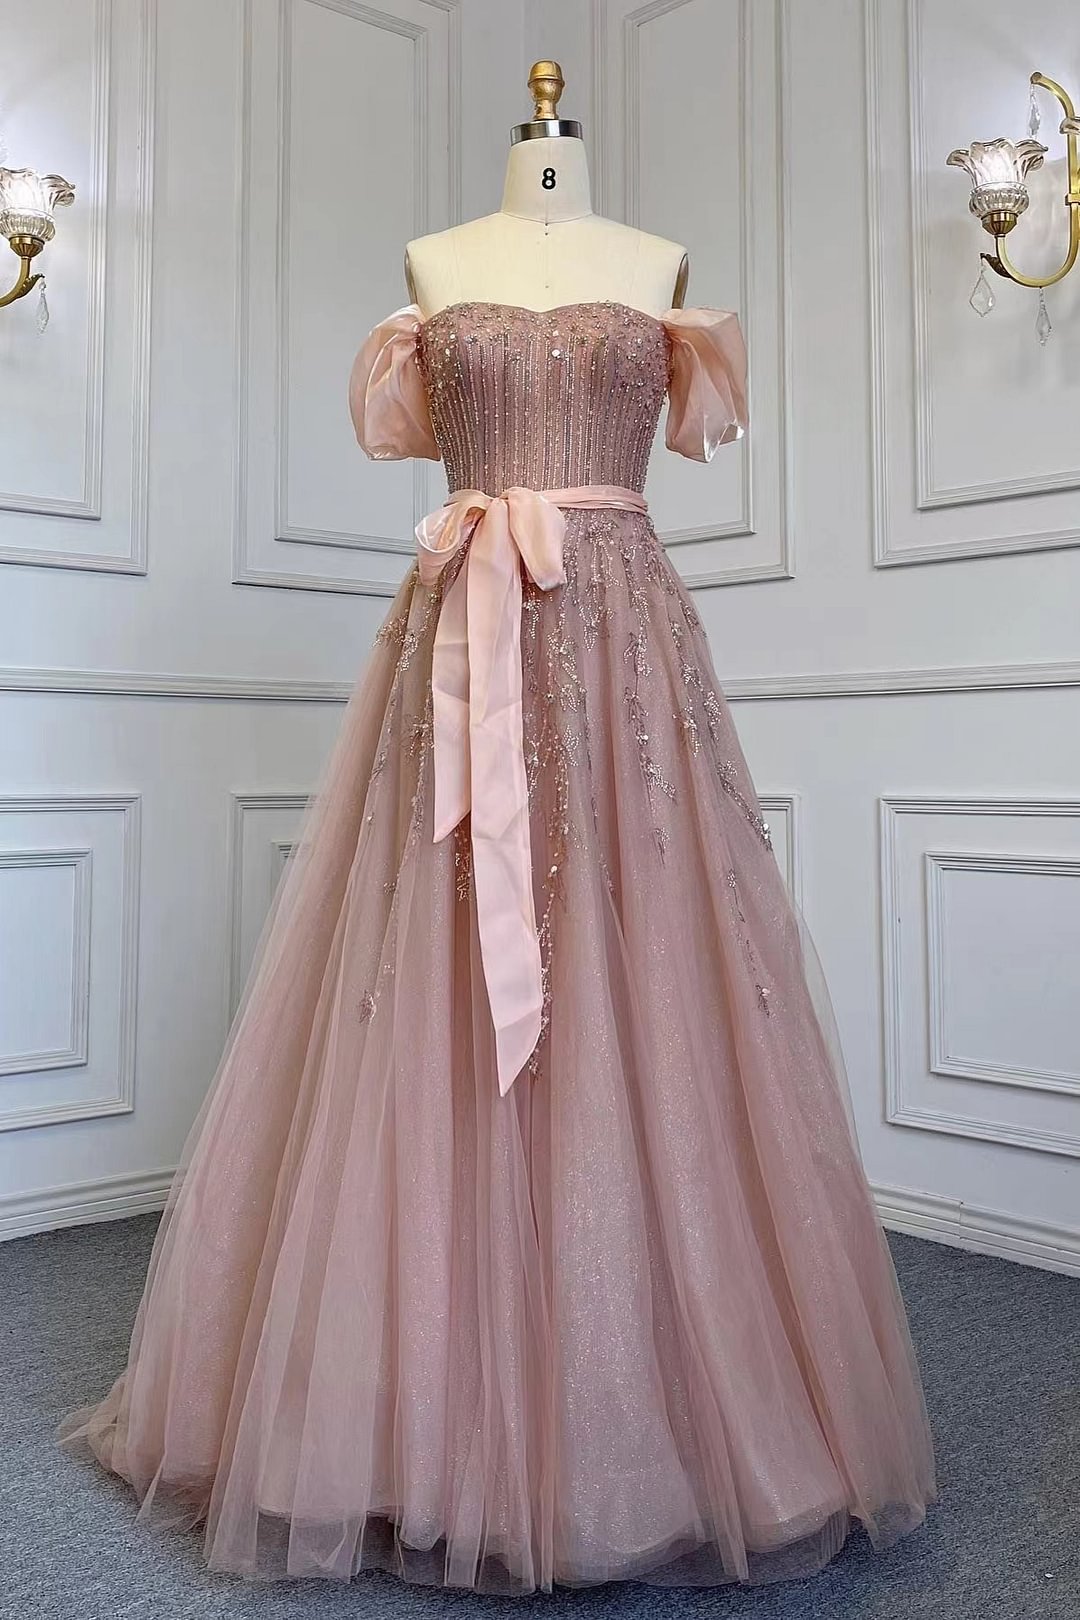 Pink Off-The-Shoulder Sequins Tulle Prom Dress Belt With Bubble Sleeves  |Ballbellas Ballbellas